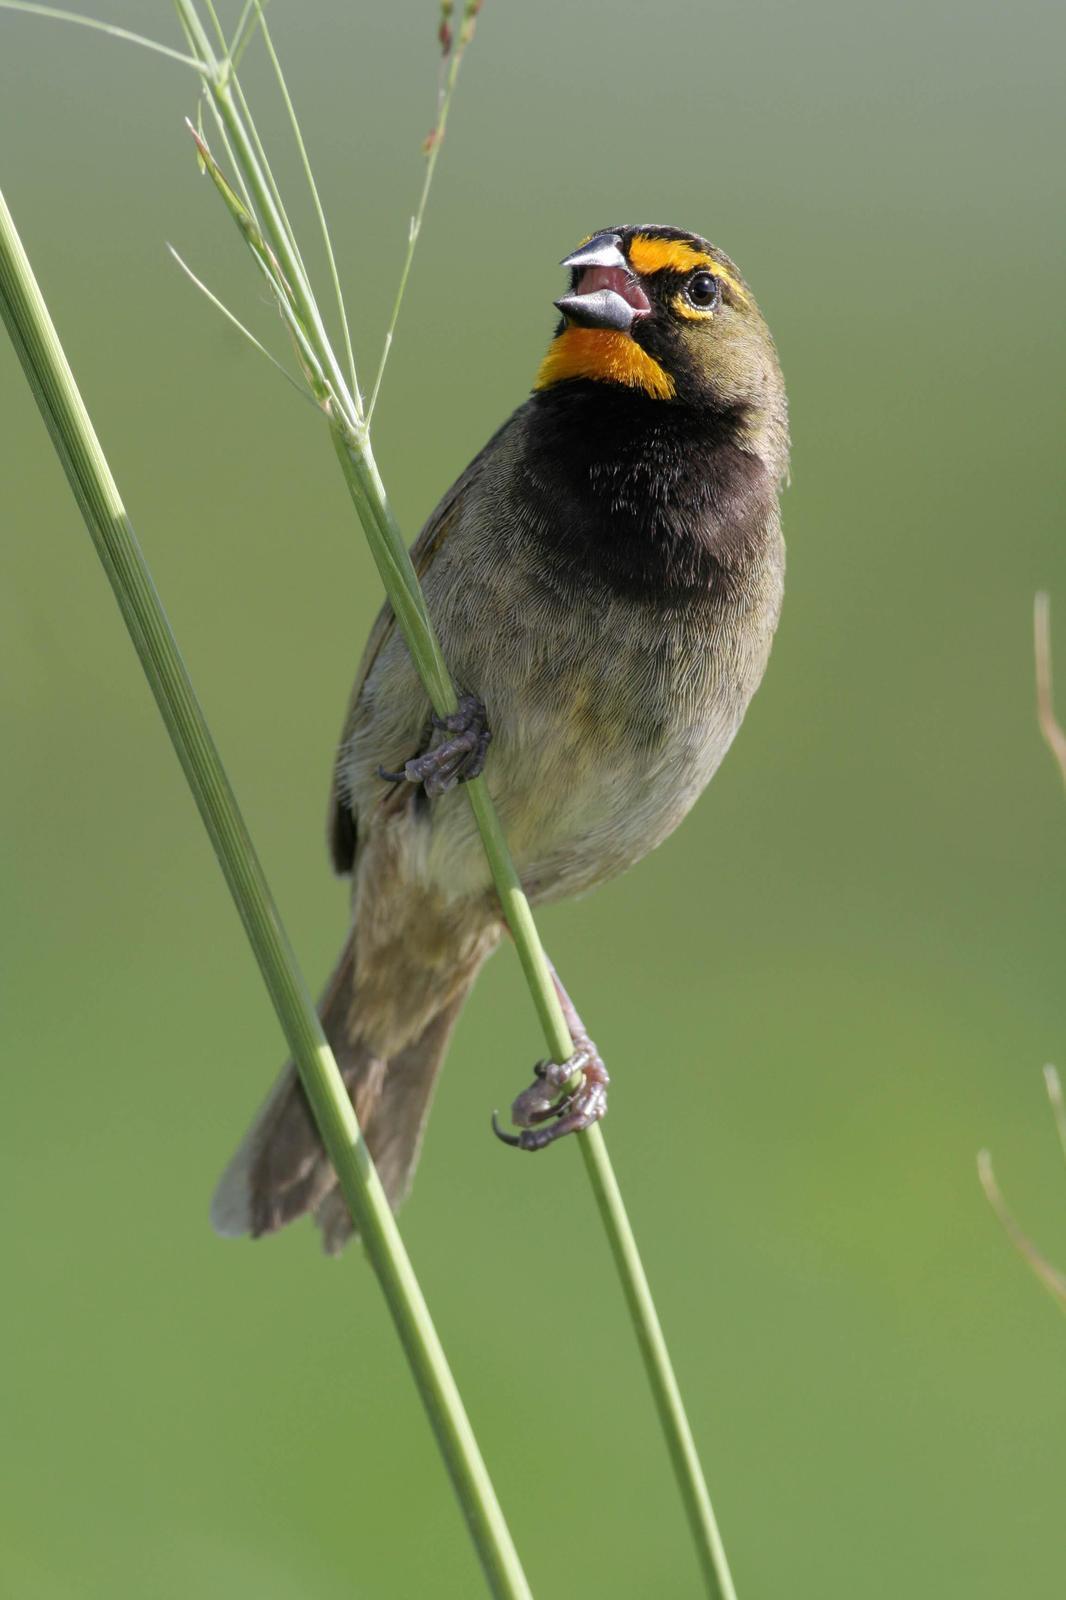 Yellow-faced Grassquit Photo by Patrick Van Thull